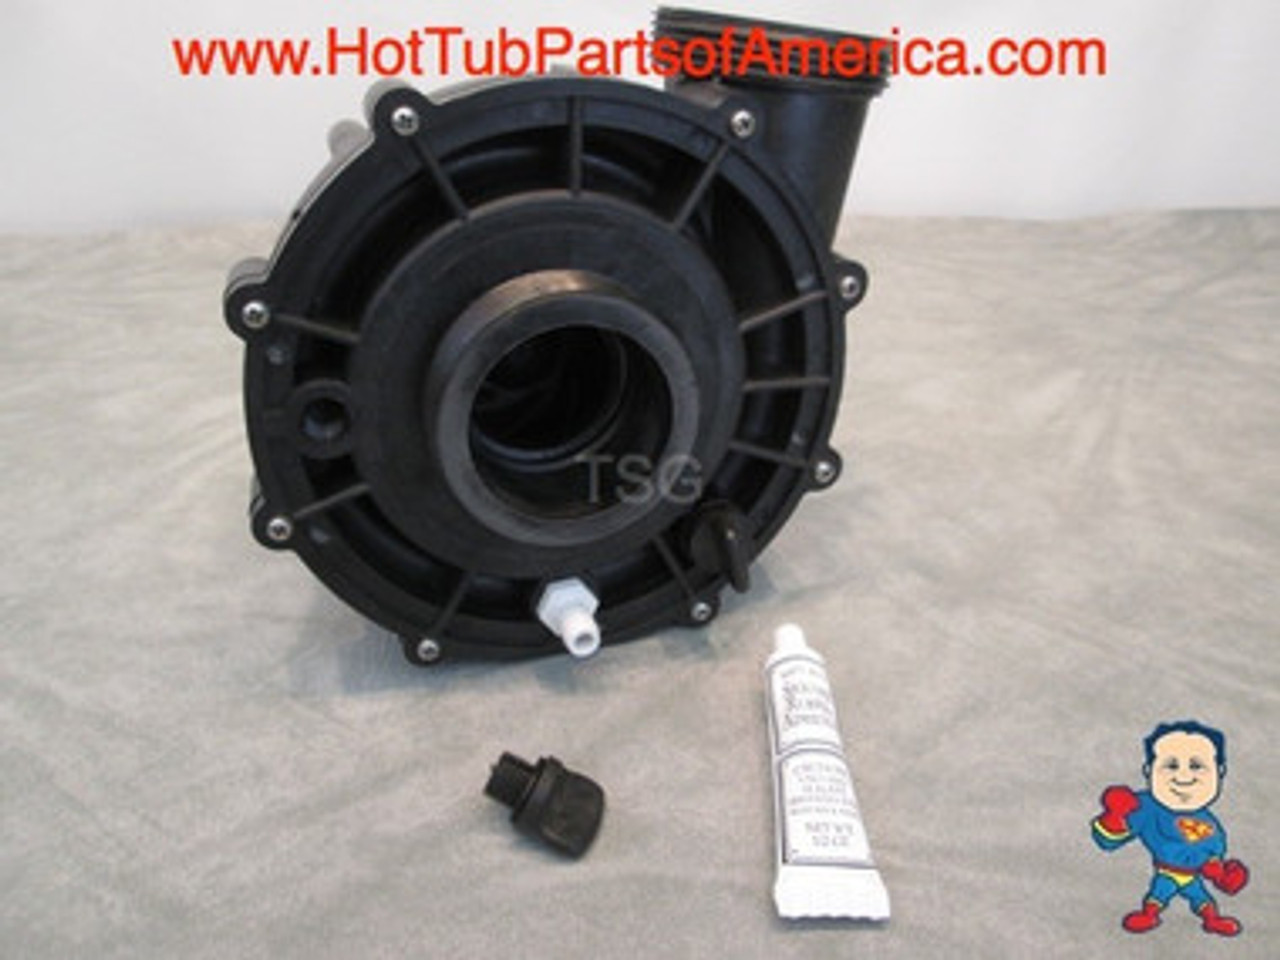 Universal CMP Spa Hot Tub Pump Wet End 2" X 2" 48 or 56 Frame 3 HP Barb Video How To
This is an exact match for various AquaFlo XP2 models and will also replace Vico Ultimax, and Waterway Hi-Flo, EX2, and Super-Flo pump wet ends. This wet end is used with a 3.0hp, 48 or 56 frame thru-bolt style motor.